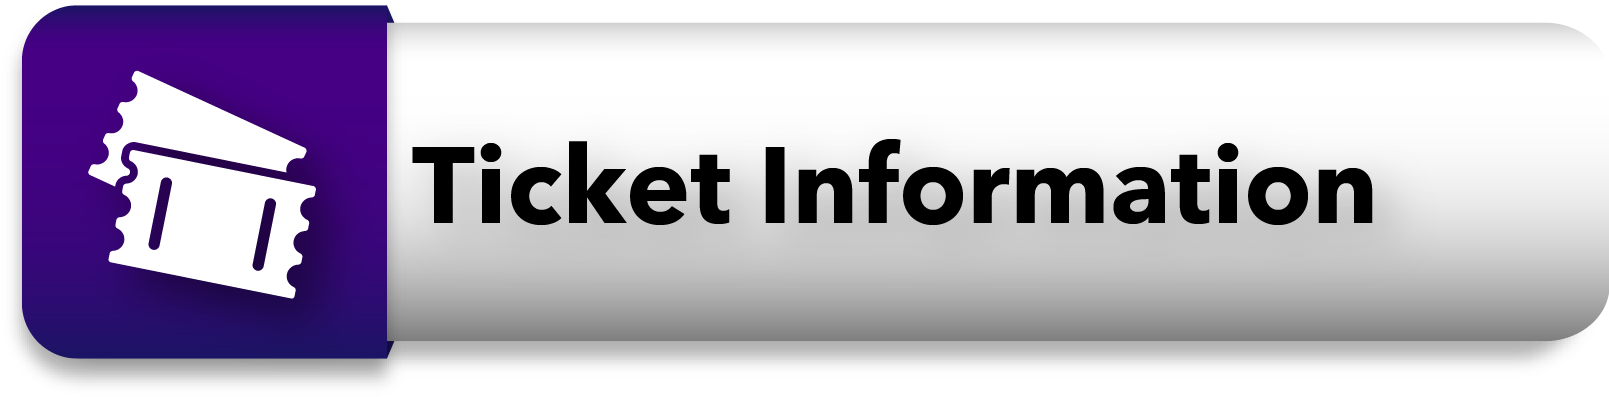 Ticket Information Button PNG